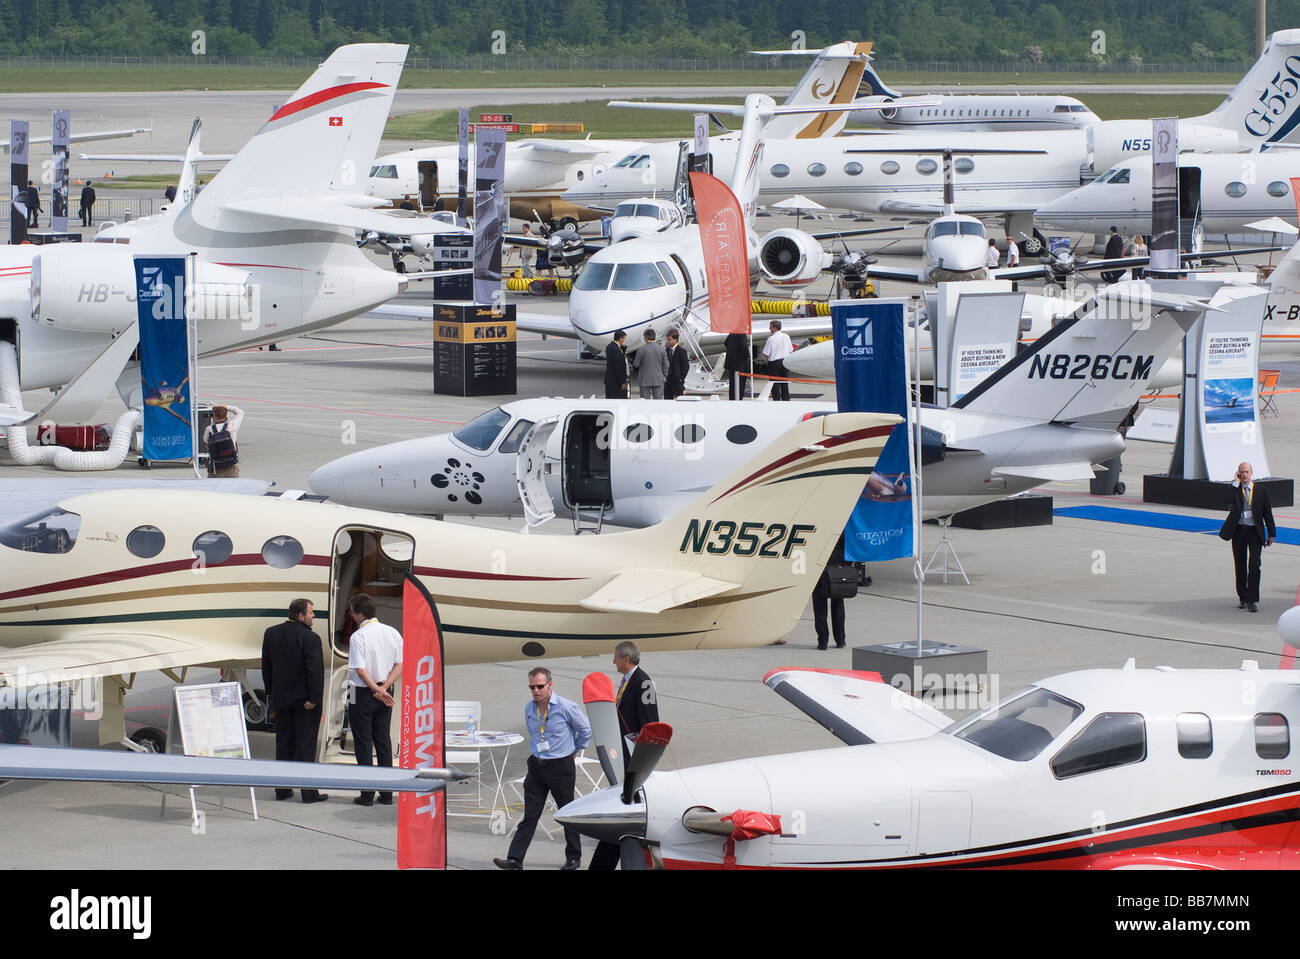 Executive Business Jets and Turboprop Aeroplanes at EBACE Aircraft Trade Show at Geneva Airport Switzerland Geneve Suisse Stock Photo